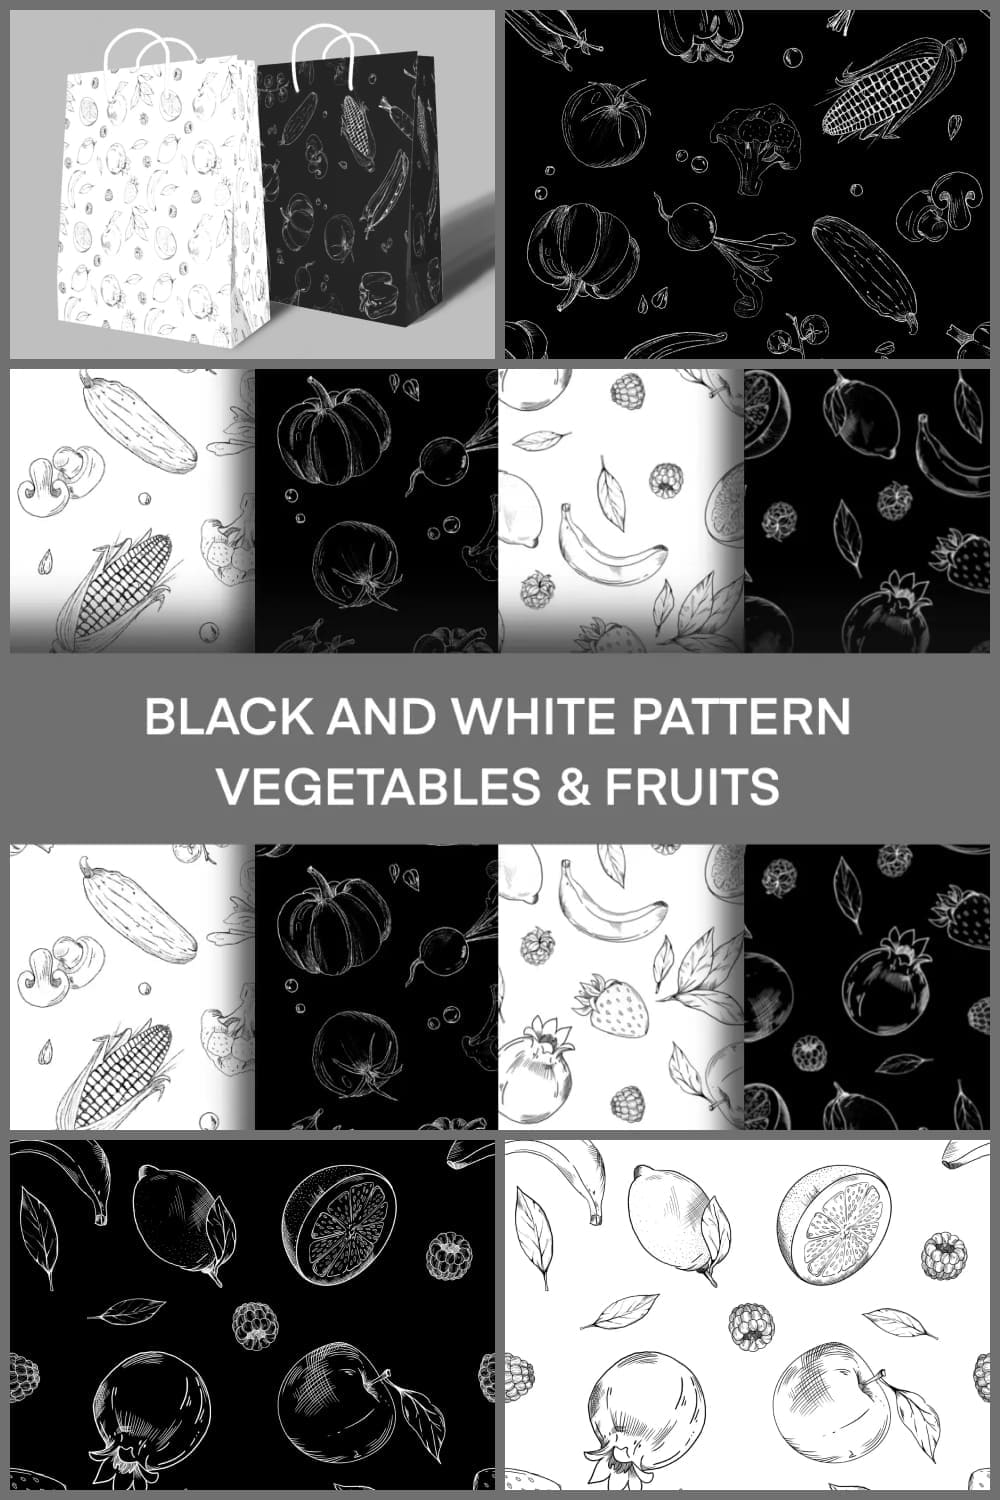 Collage of black and white images of fruits and vegetables.